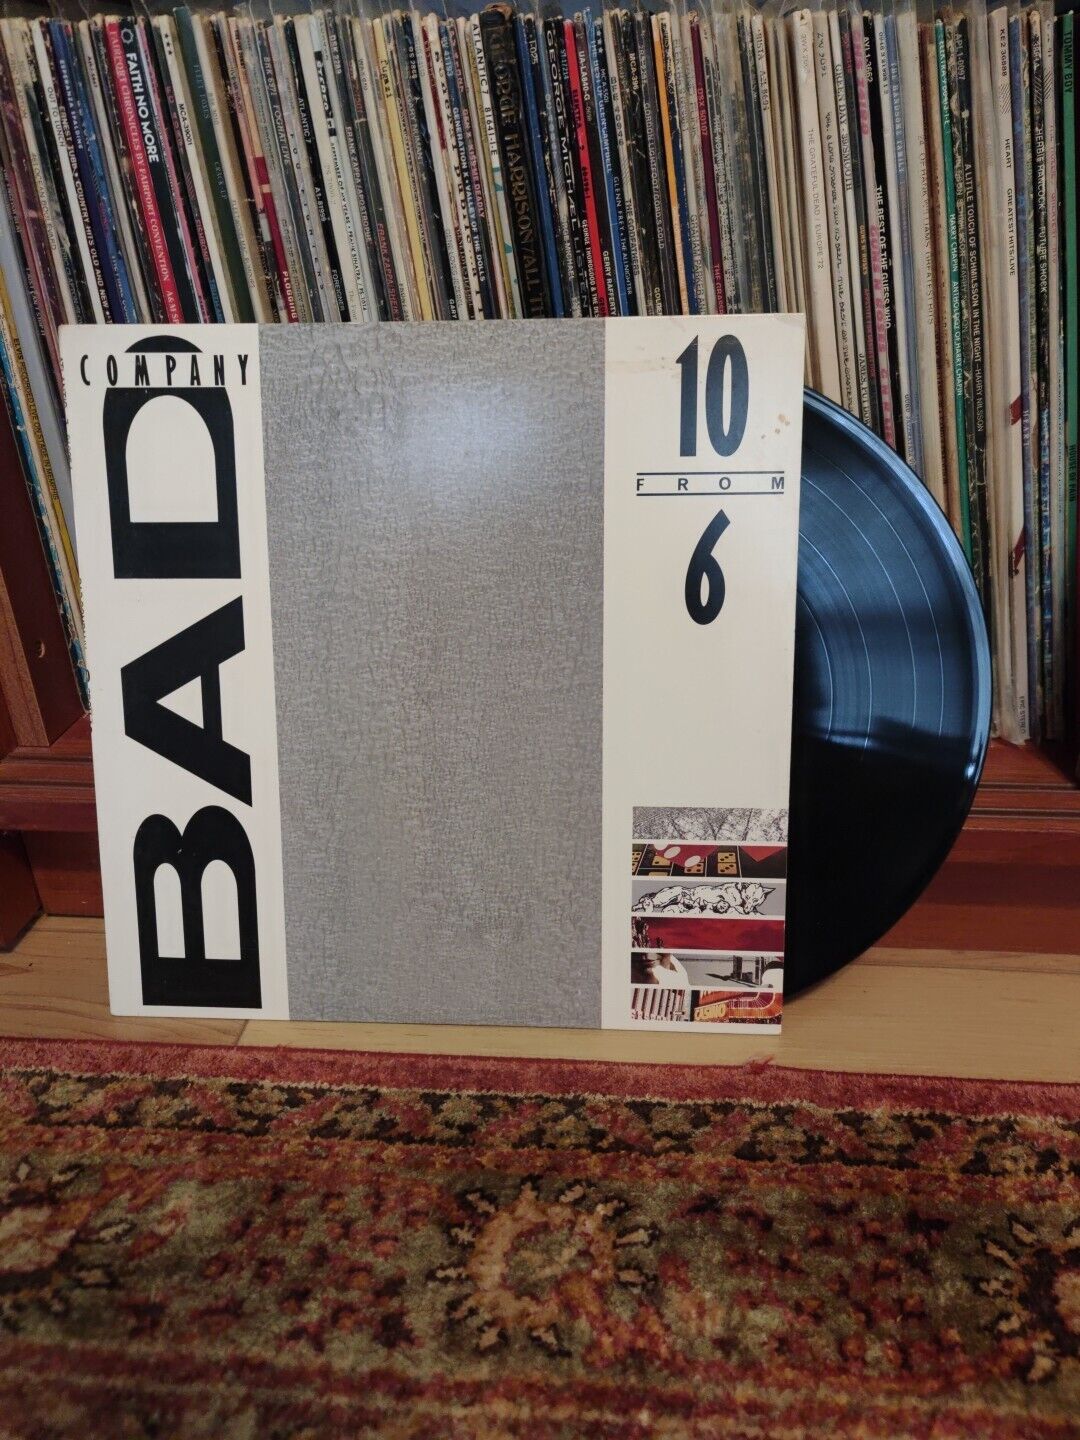 Bad Company 10 from 6 vinyl hits collection, Best Of